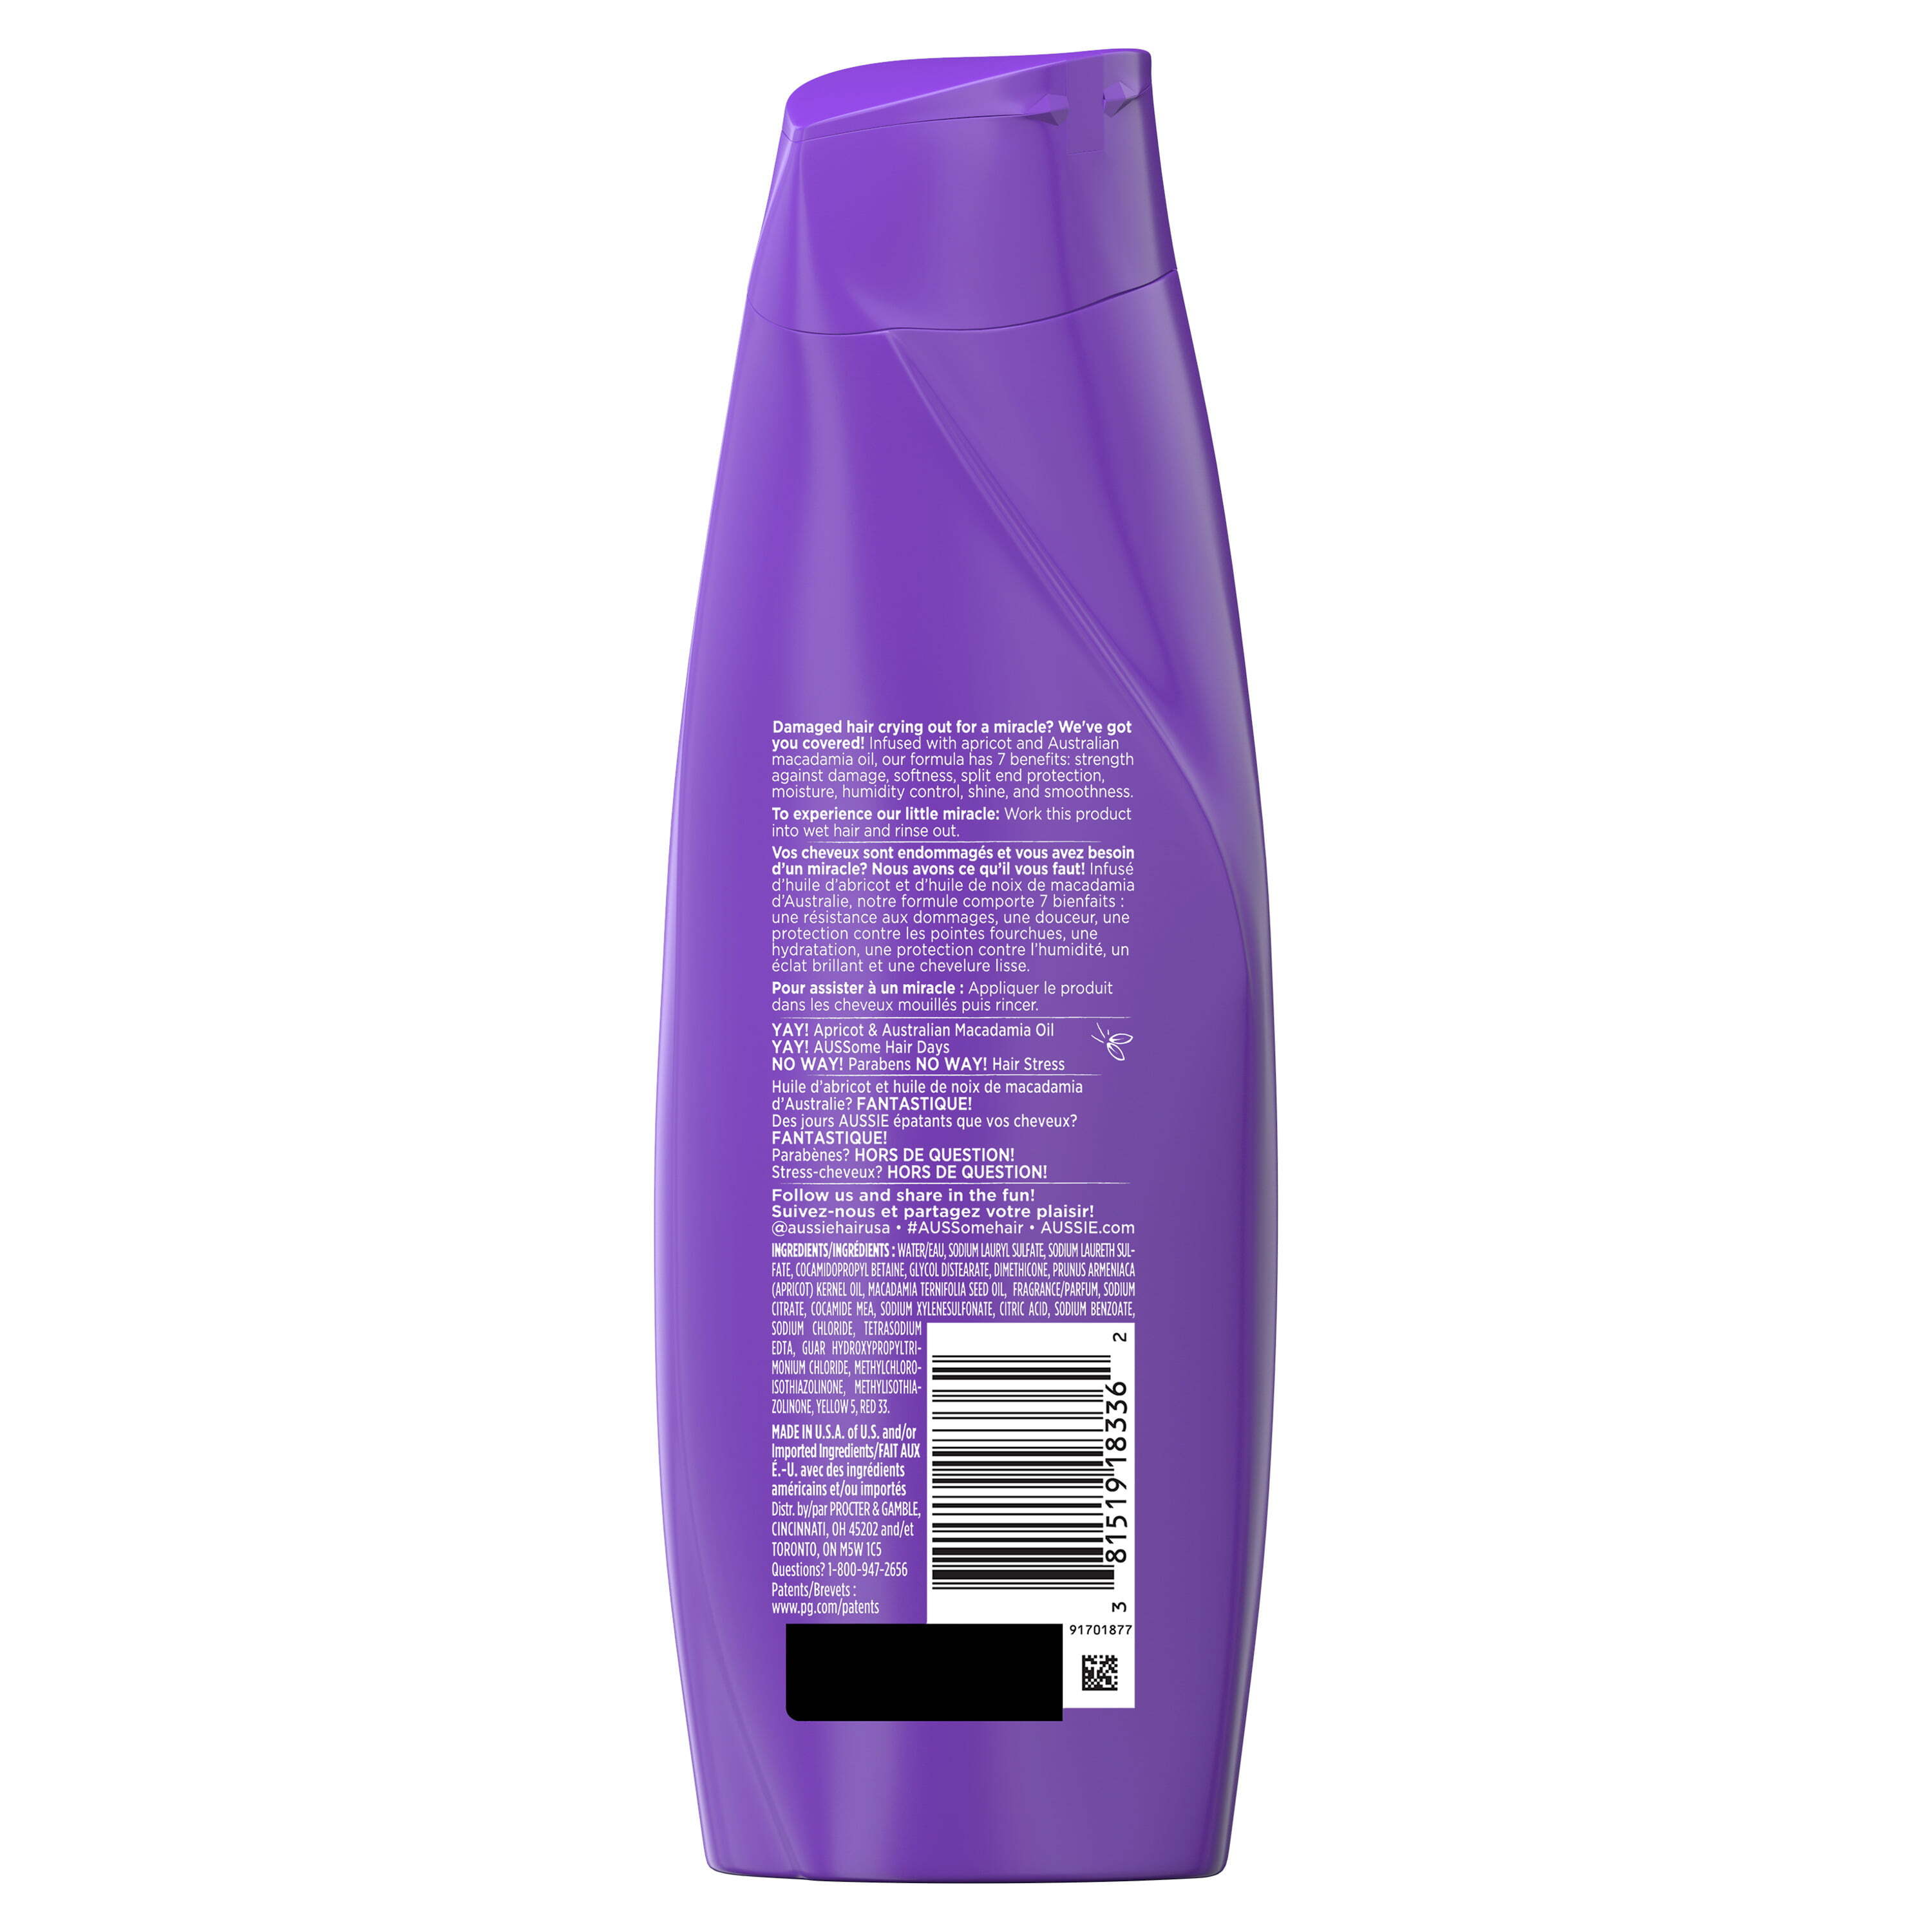 Aussie Total Miracle Shampoo for All Hair Types 12.1 fl oz - image 2 of 8